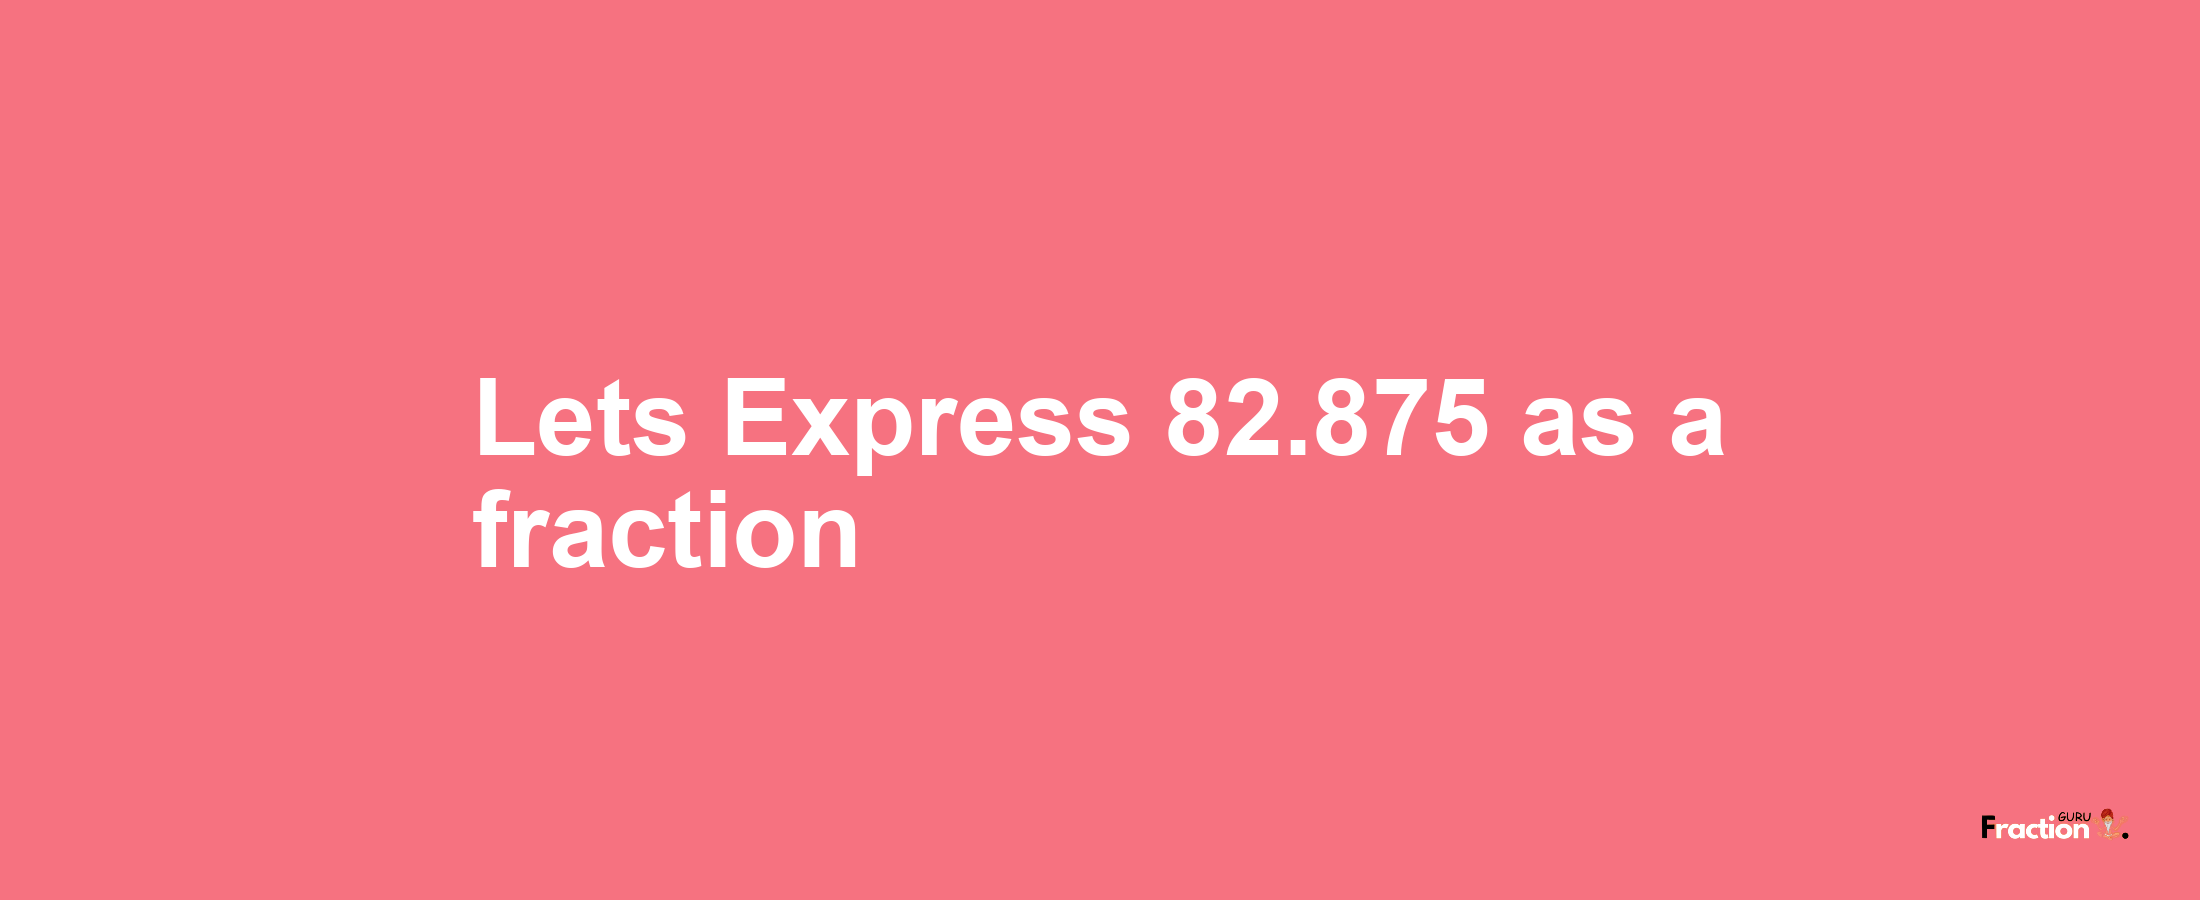 Lets Express 82.875 as afraction